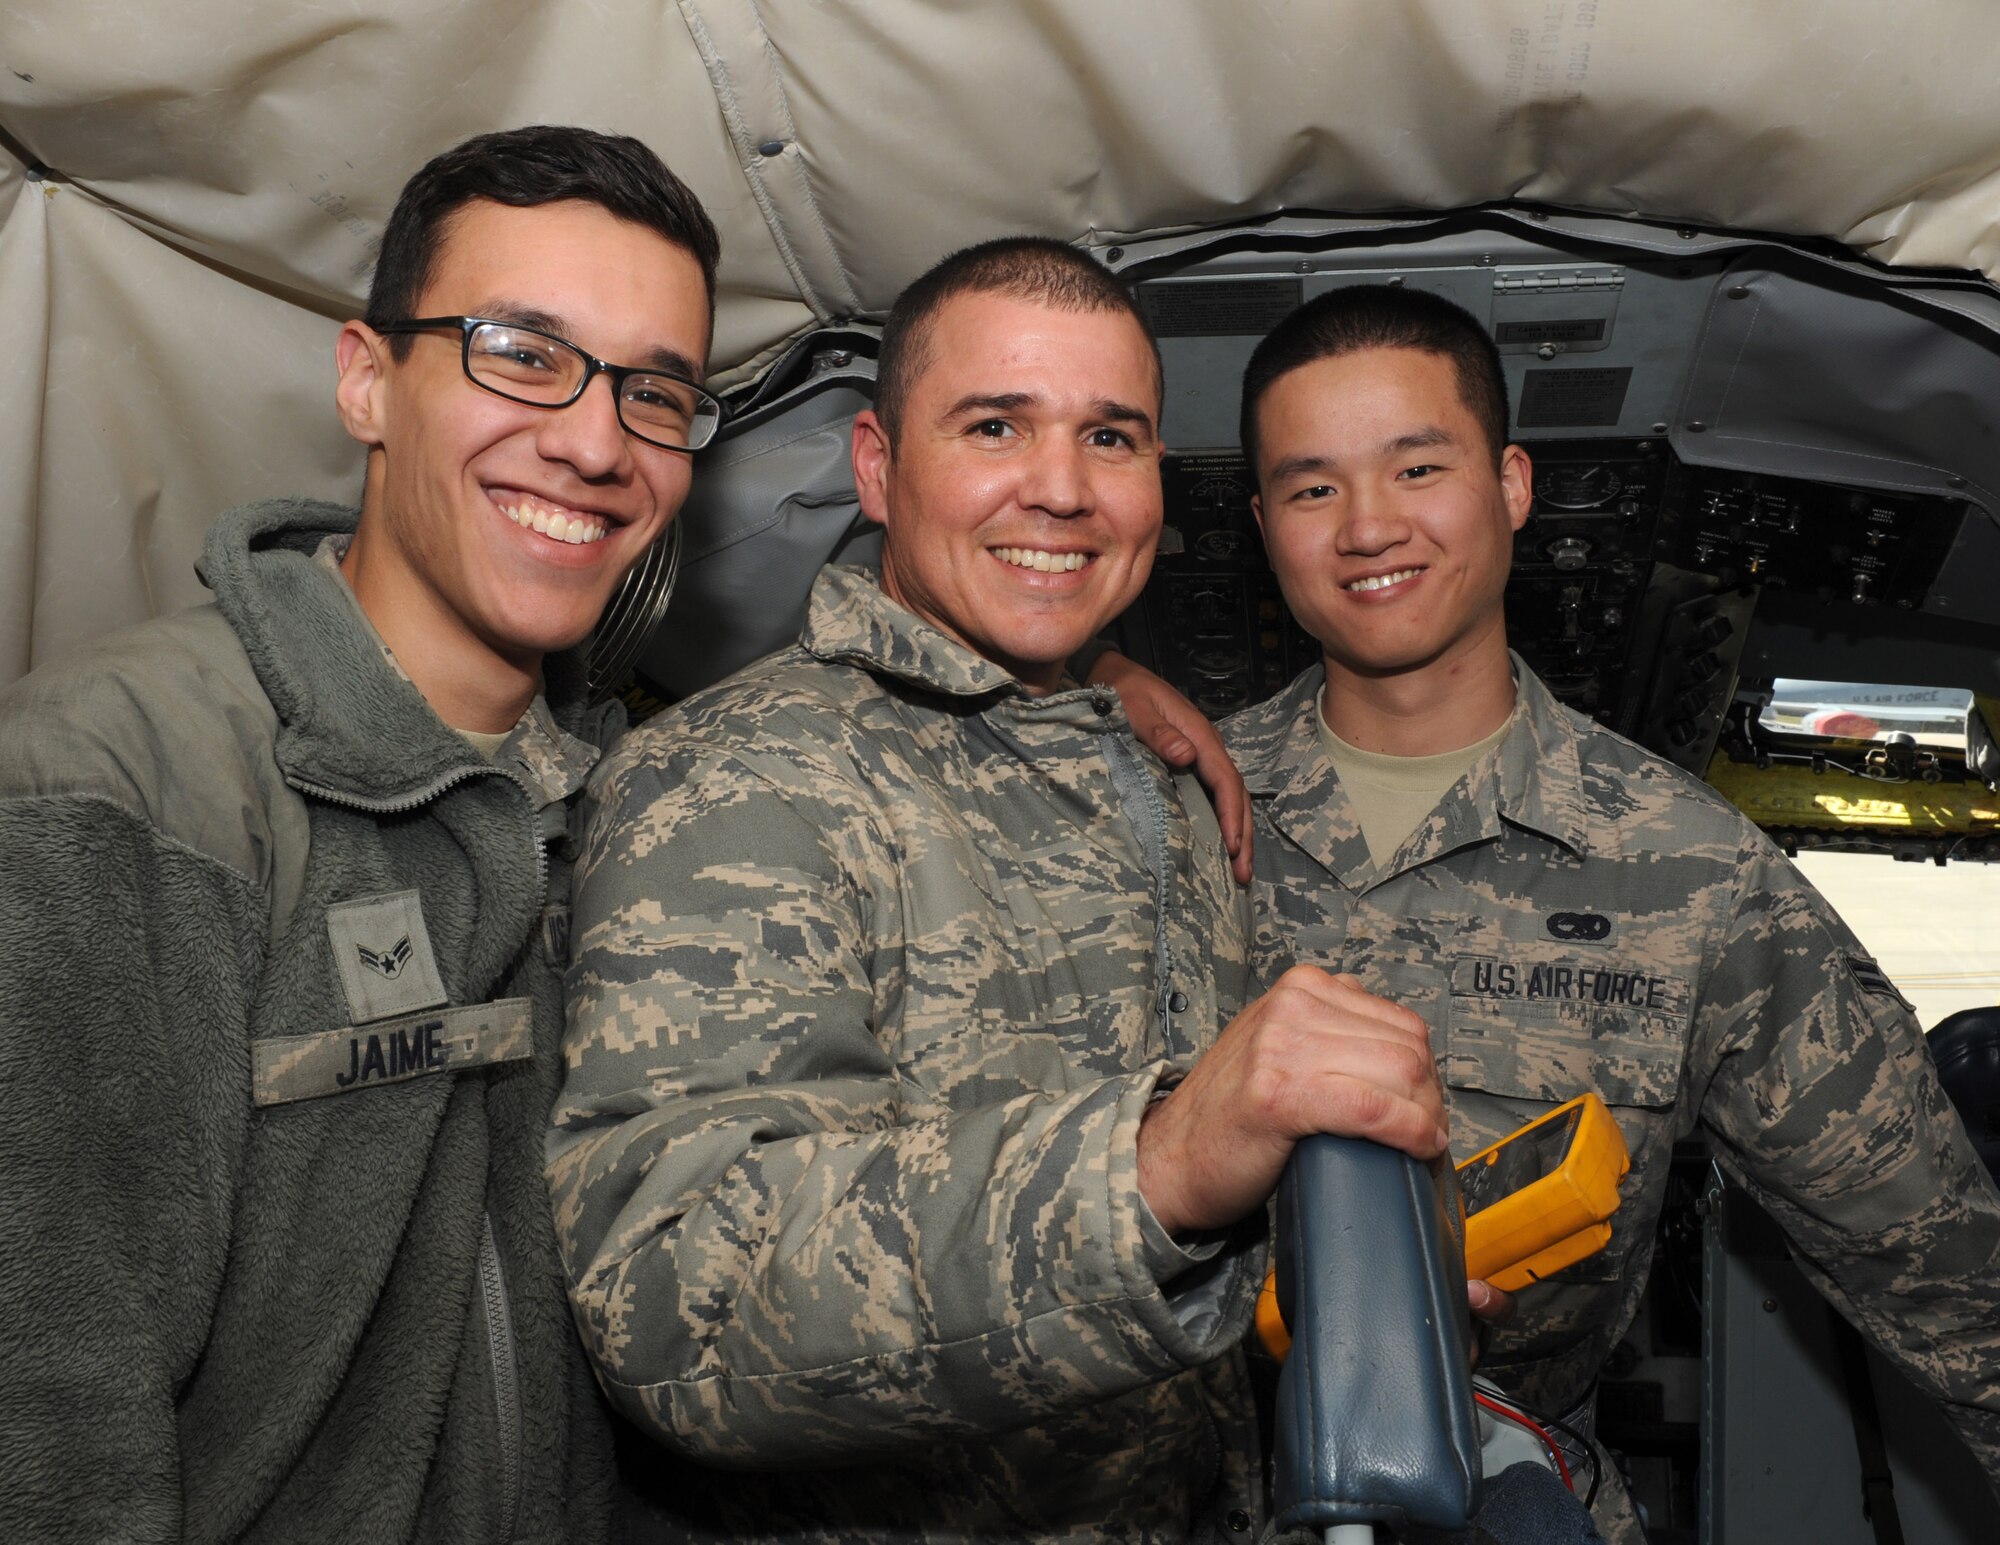 Airman 1st Class Kahn Jaime, left, Tech. Sgt. Braulio Coriano, center, and Airman 1st Class Dawei Yang, 22nd Aircraft Maintenance Squadron Airmen pose for a photo, April 3, 2015, at McConnell Air Force Base, Kan. The 22nd AMXS is an example of the diversity that can be seen throughout the Air Force. (U.S. Air Force photo by Airman 1st Class Tara Fadenrecht)